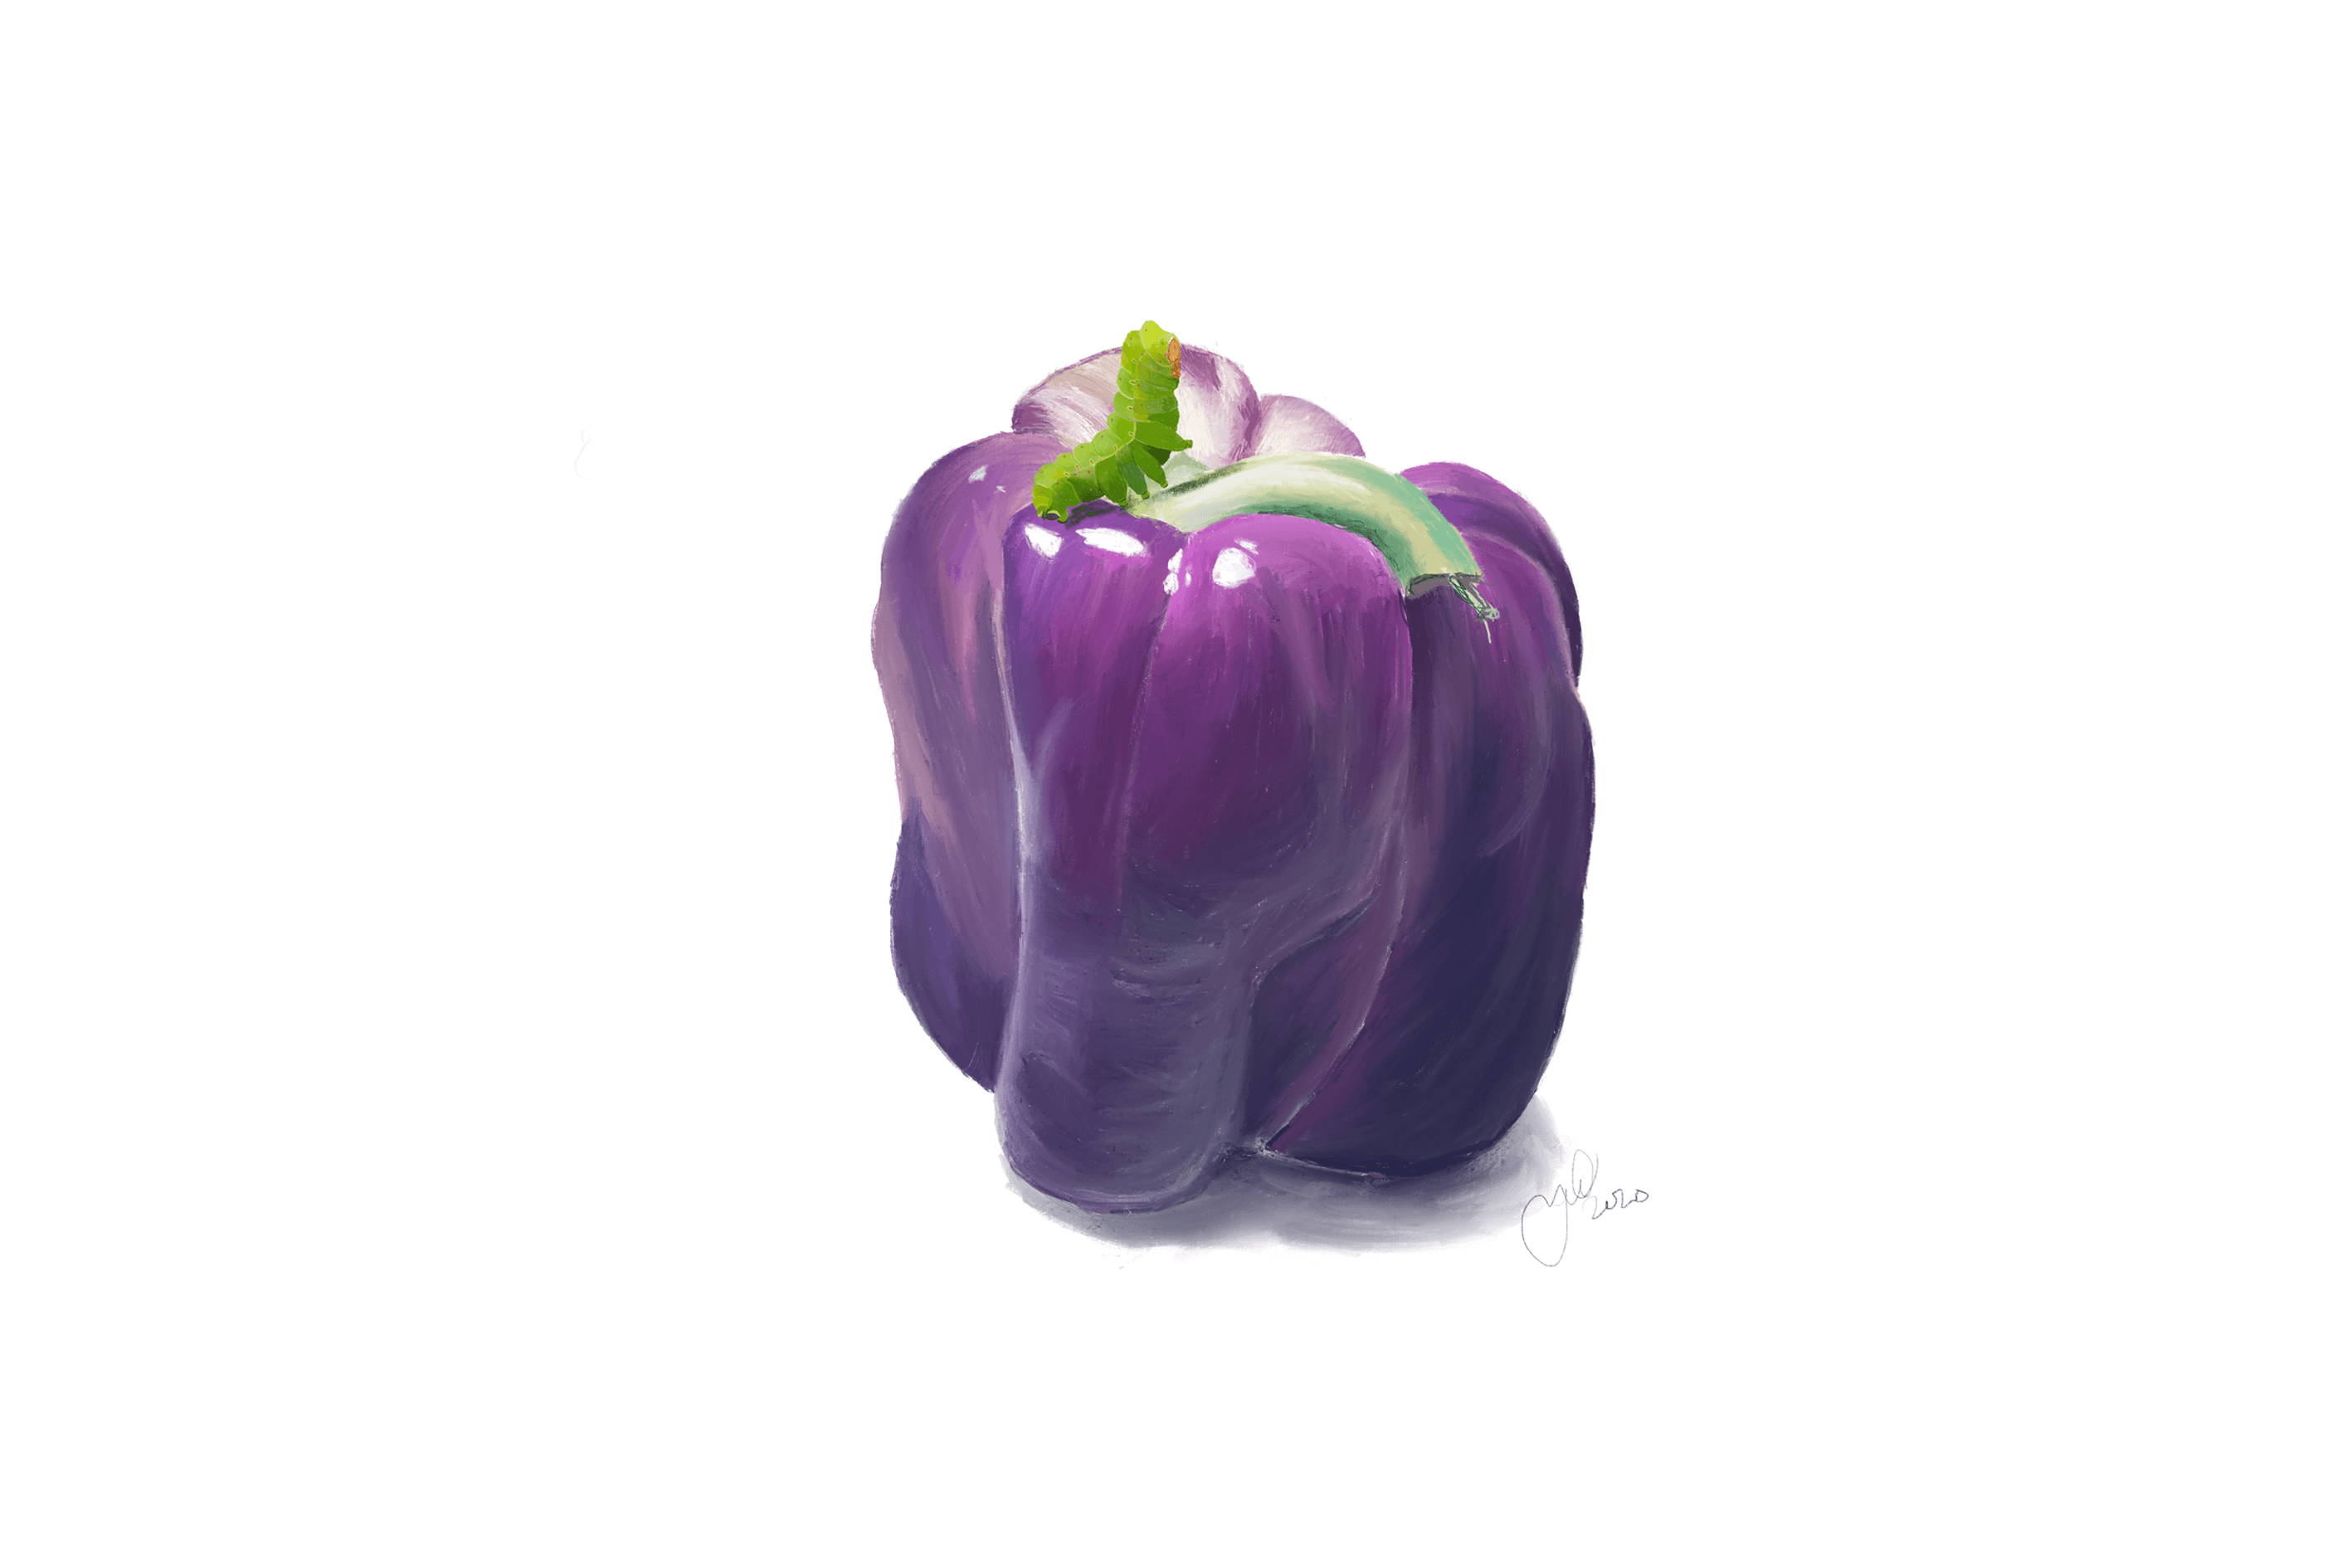 003 Purple Pepper Tapping G 1808300